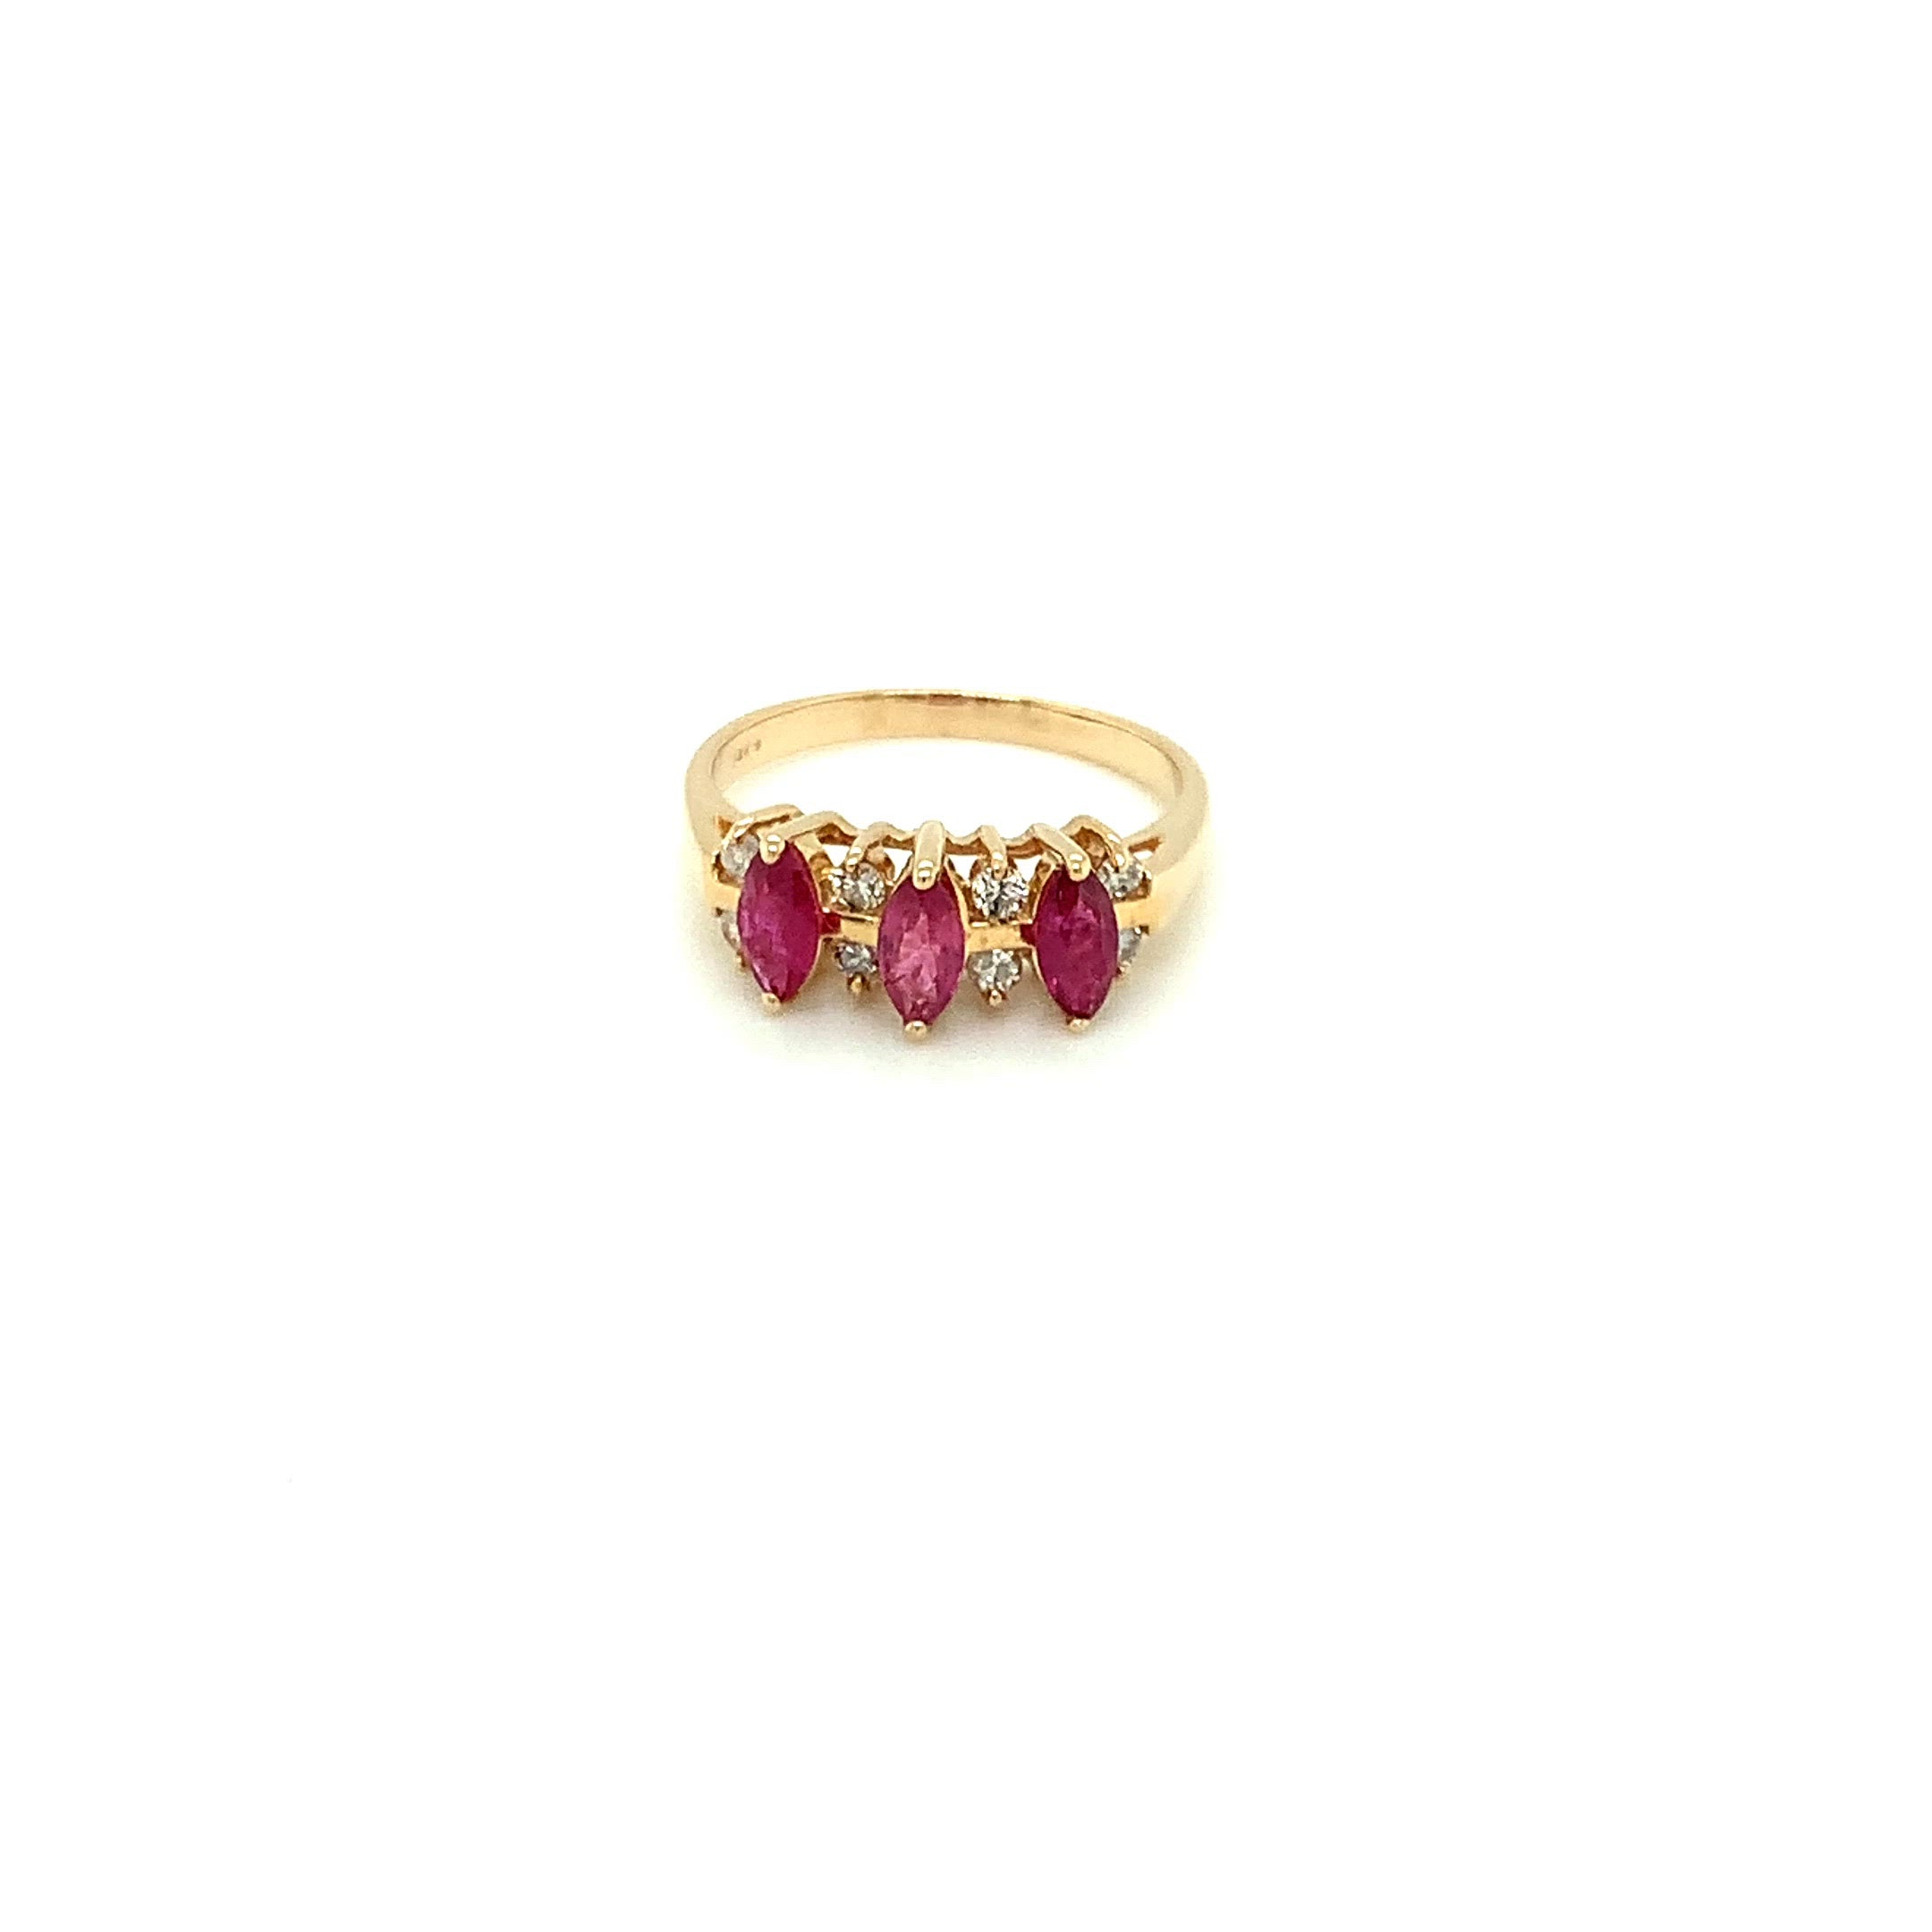 Natural Ruby & Diamond Ring 14K Solid Gold 1.17tcw Ruby Ring July Birthstone Ring Cluster Ring Vintage Ring Women's Ring Fine Ring Jewellery